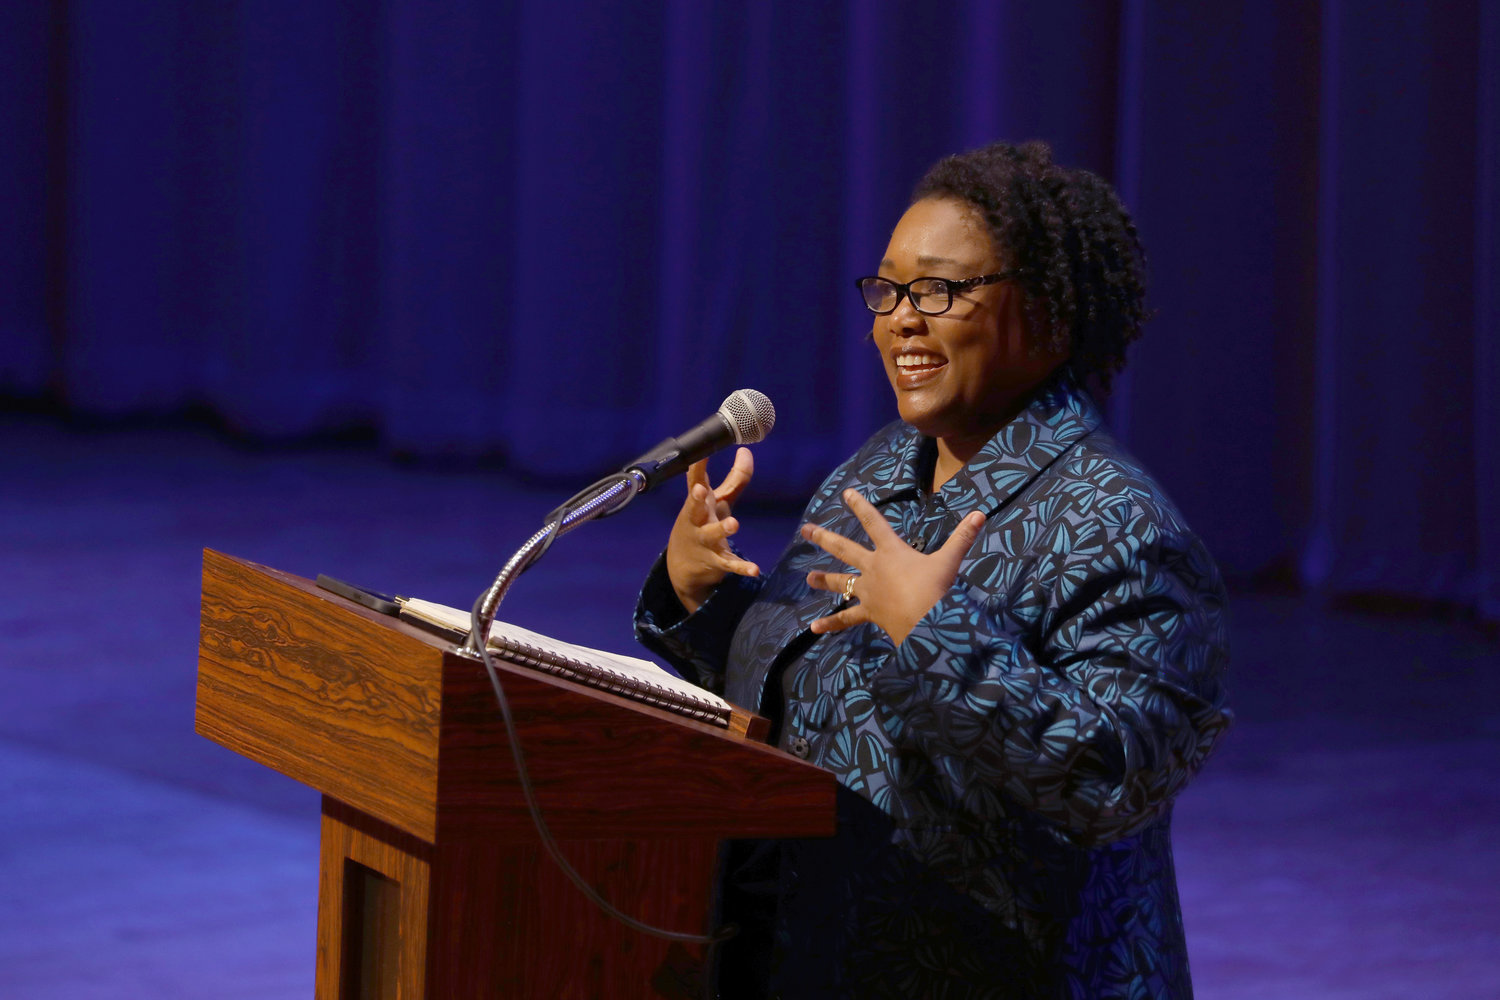 As part of the Diocese of Providence 150th Anniversary celebration, Gloria Purvis visited McVinney Auditorium to speak on “Born and Unborn: The Integrity of the Human Person in The Womb and Society,” on Oct. 16.